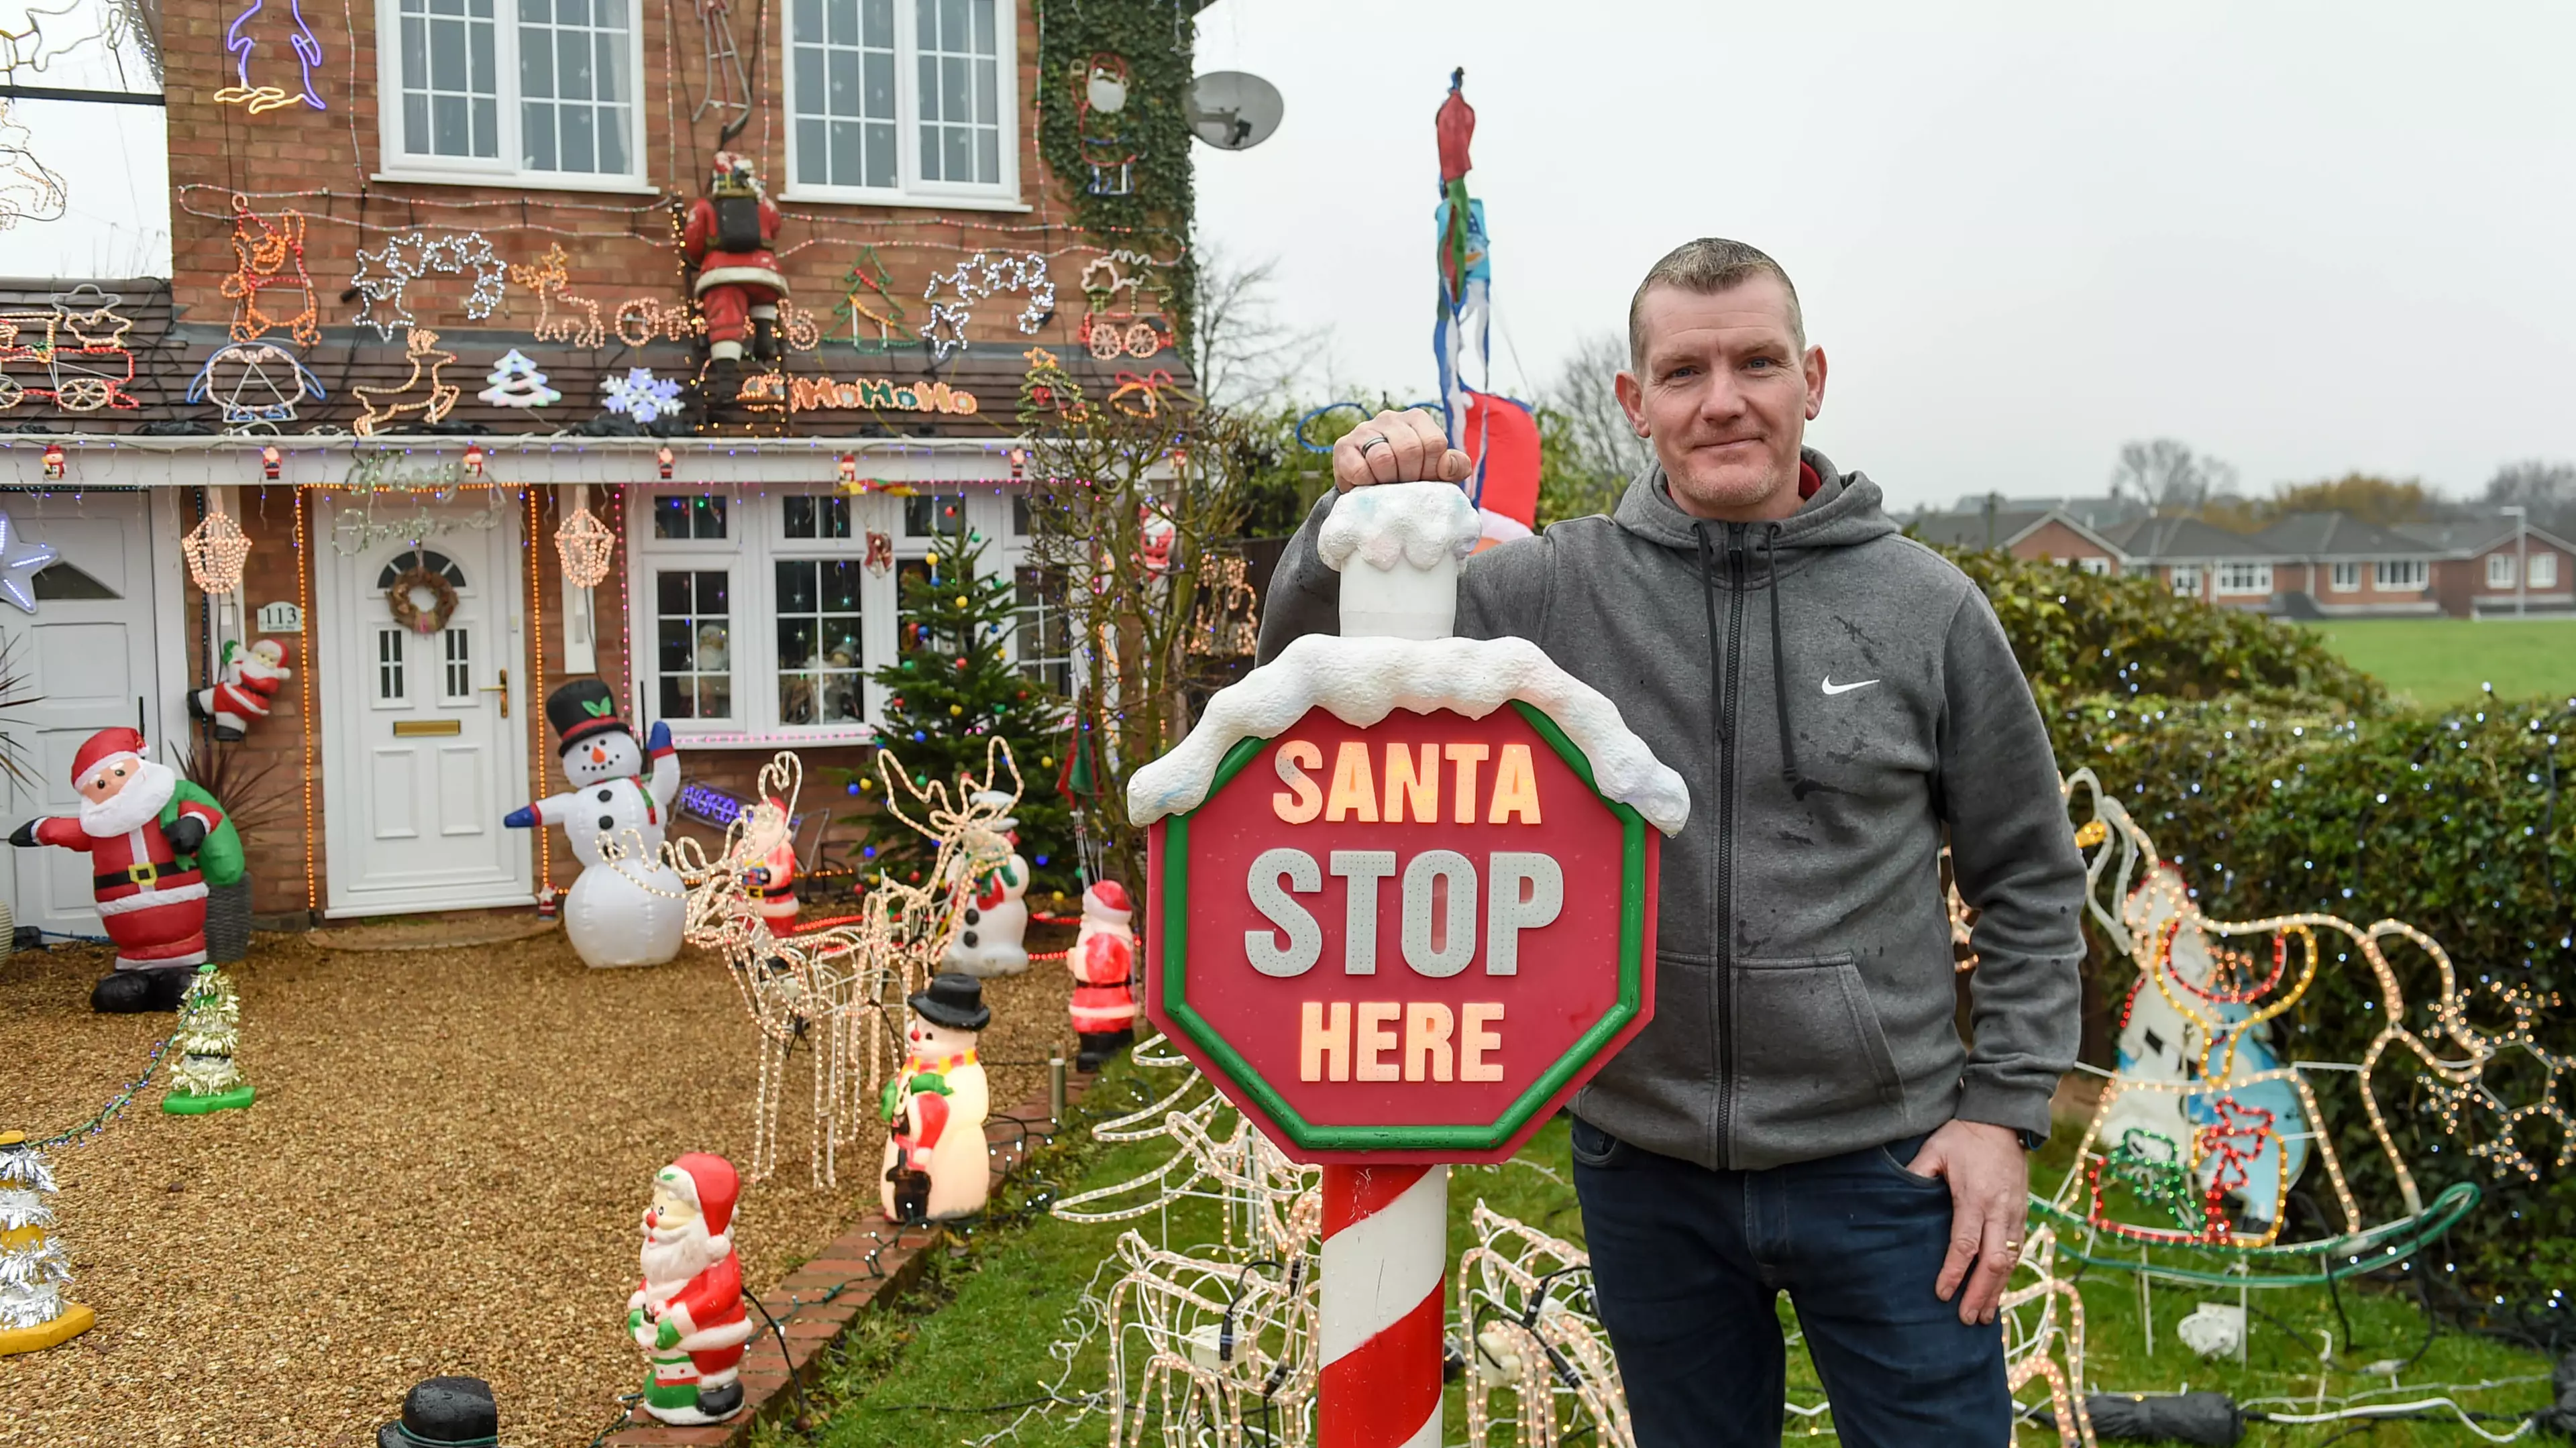 Police Threaten To Fine Dad £10,000 If He Turns On Charity Christmas Lights